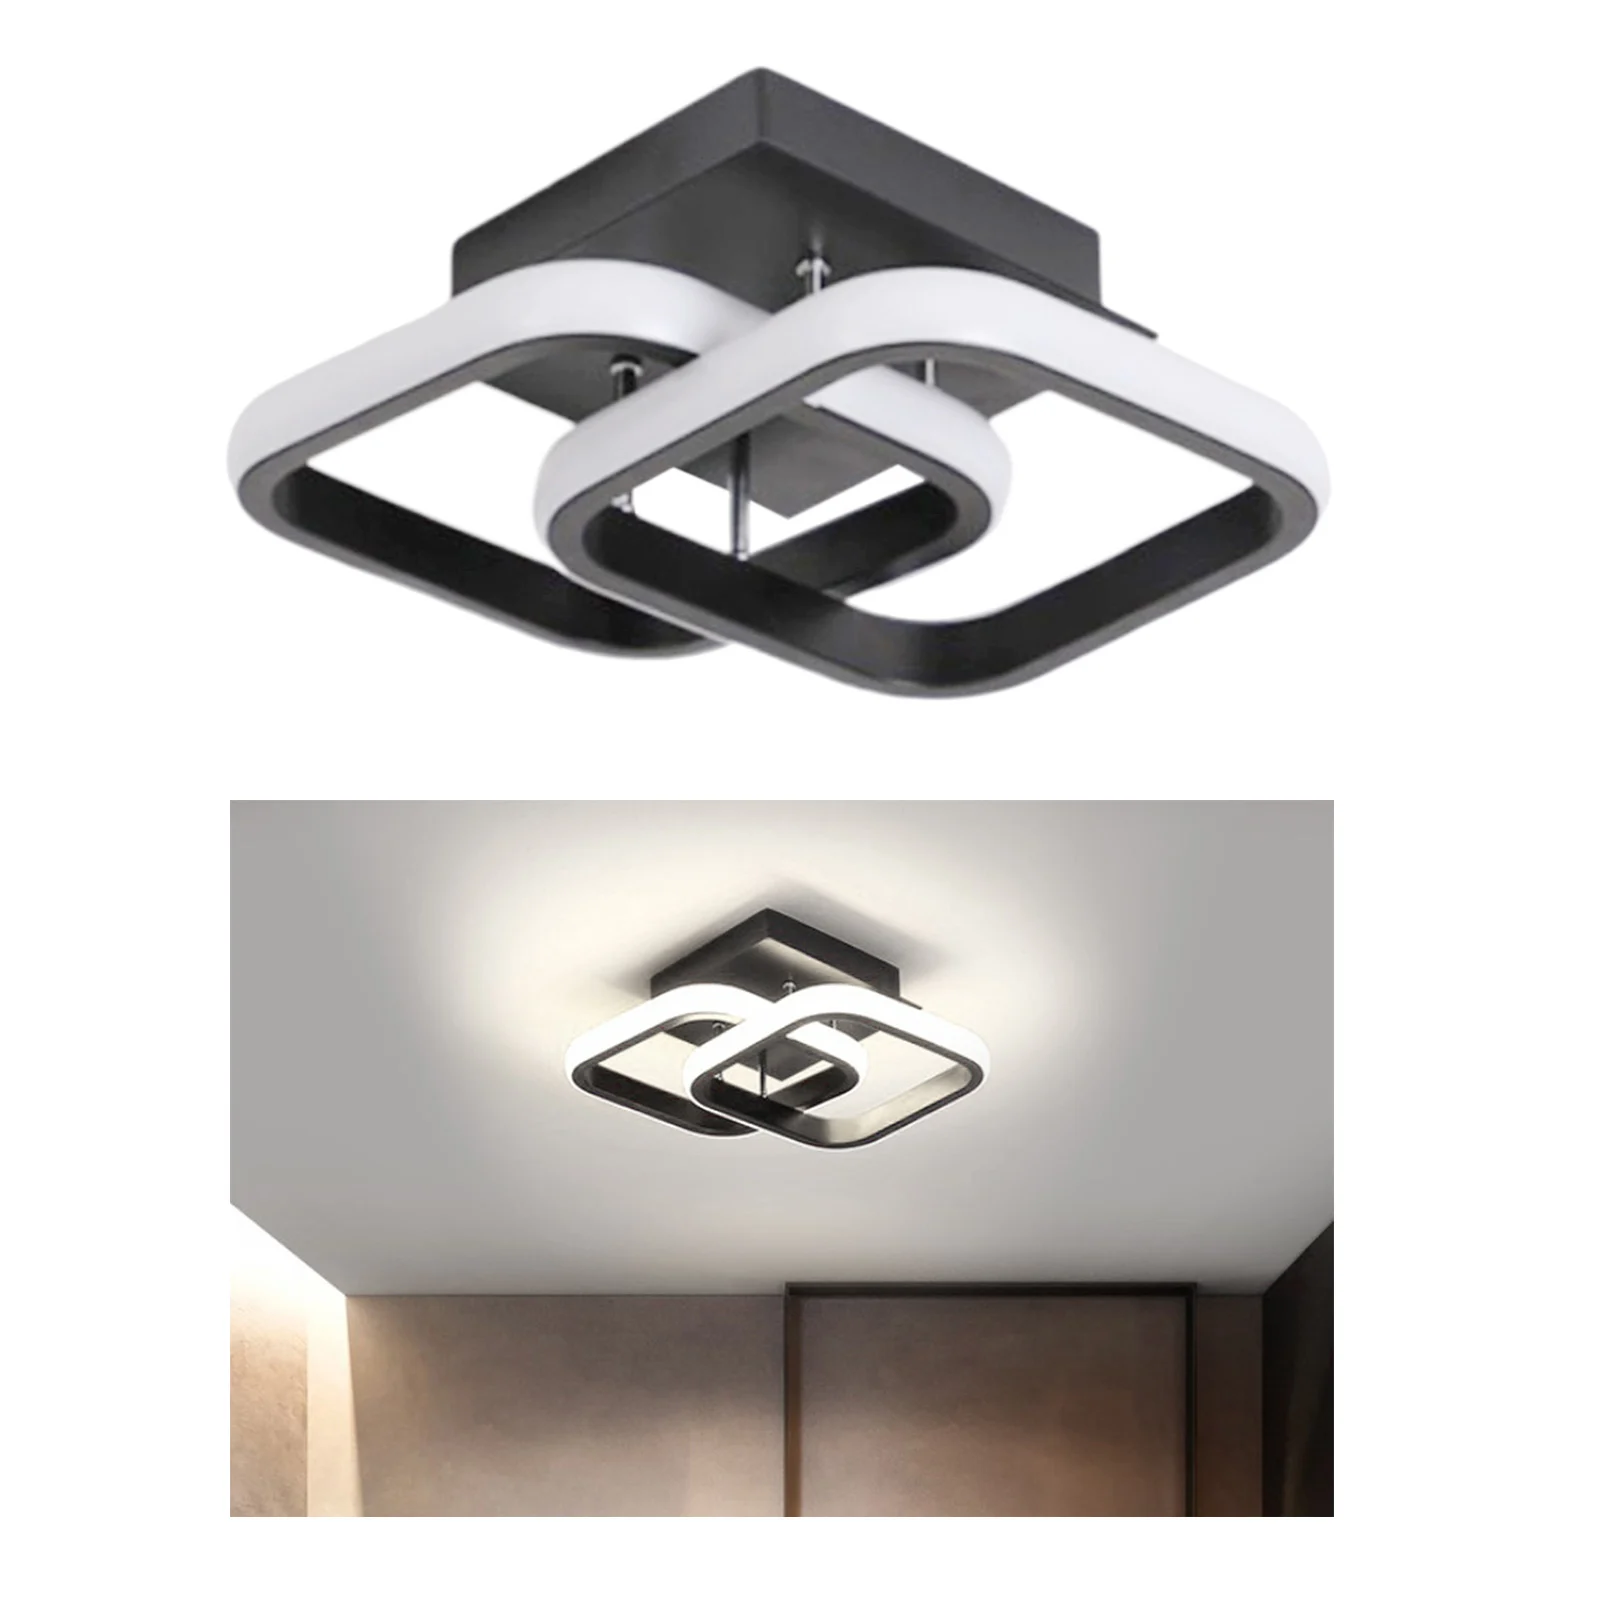 Ceiling Light LED Light Easy to Installation Ceiling Lamp for Living Room Bedroom Kitchen Balcony Dining Room Apartment Decors